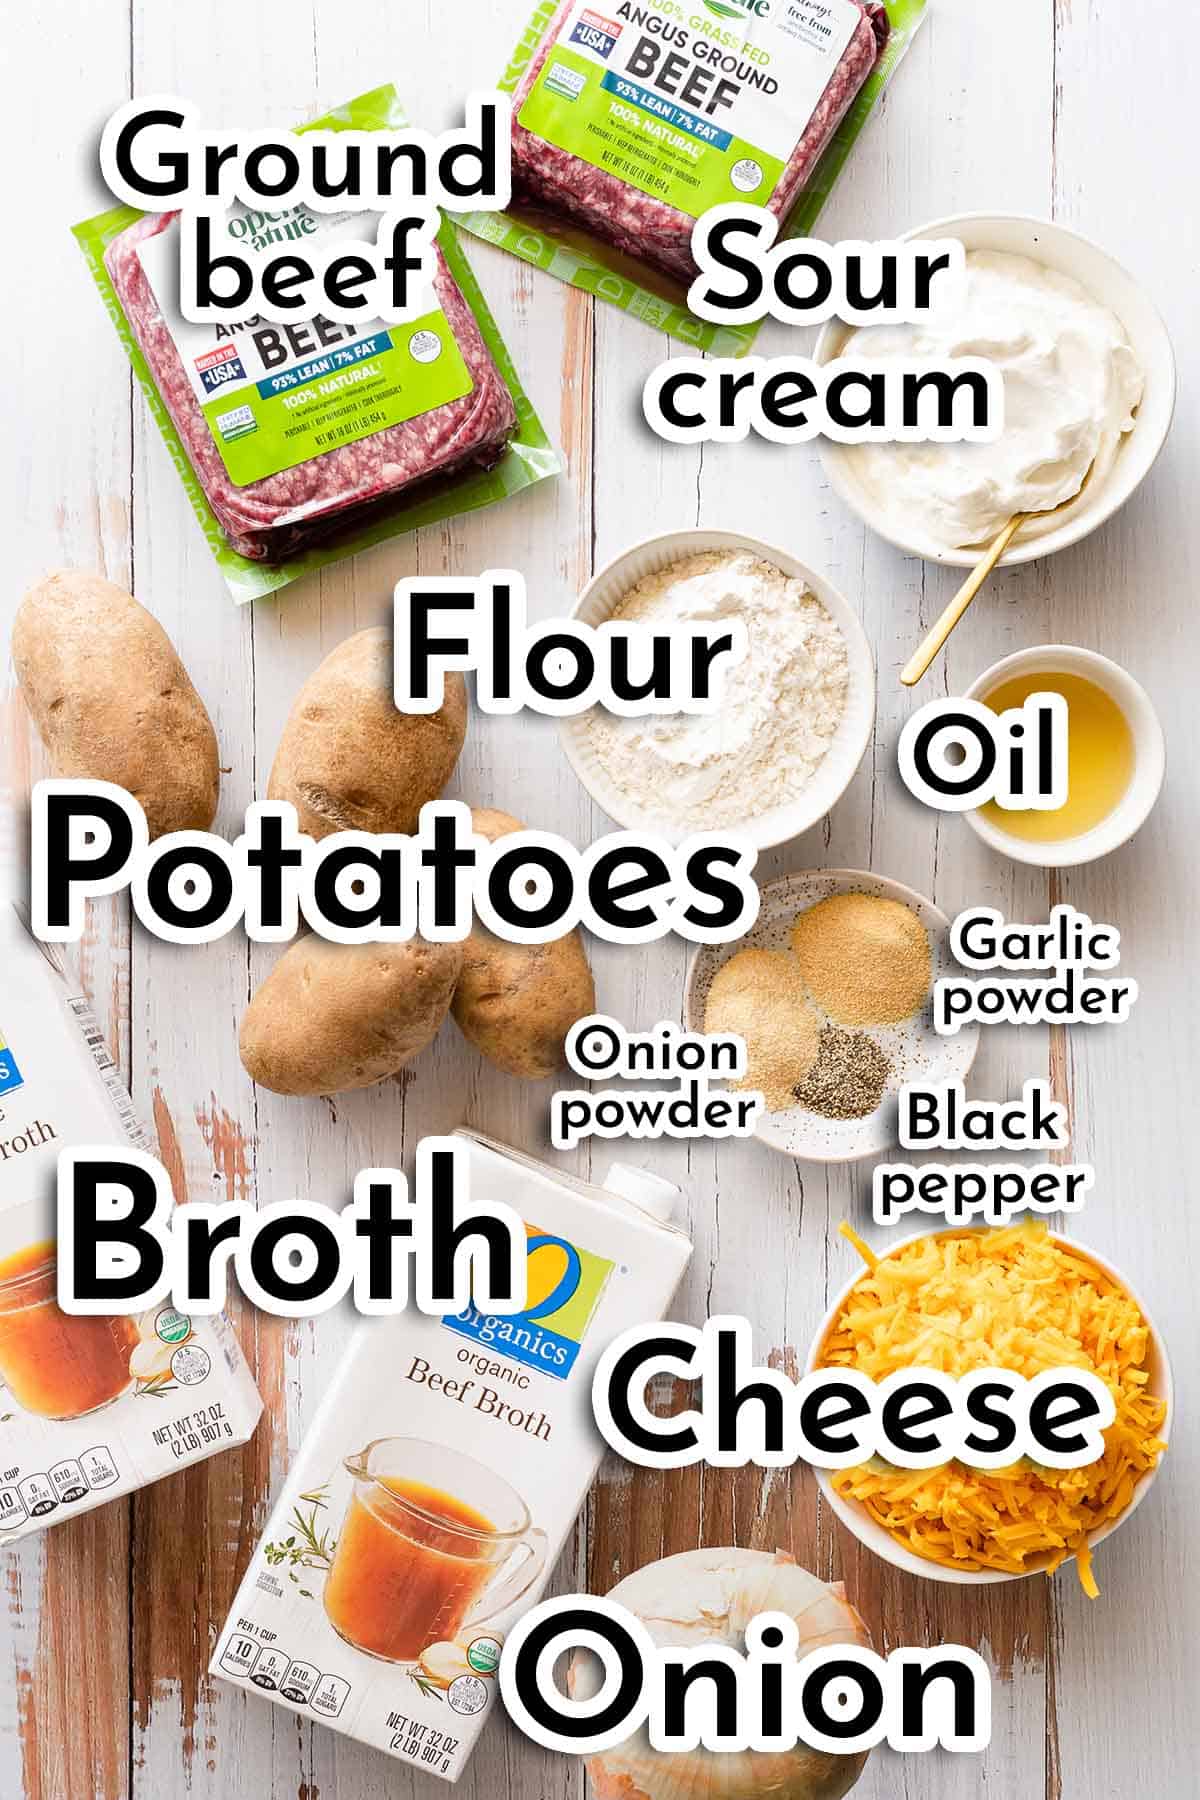 ingredients for creamy hamburger potato soup with text labels.